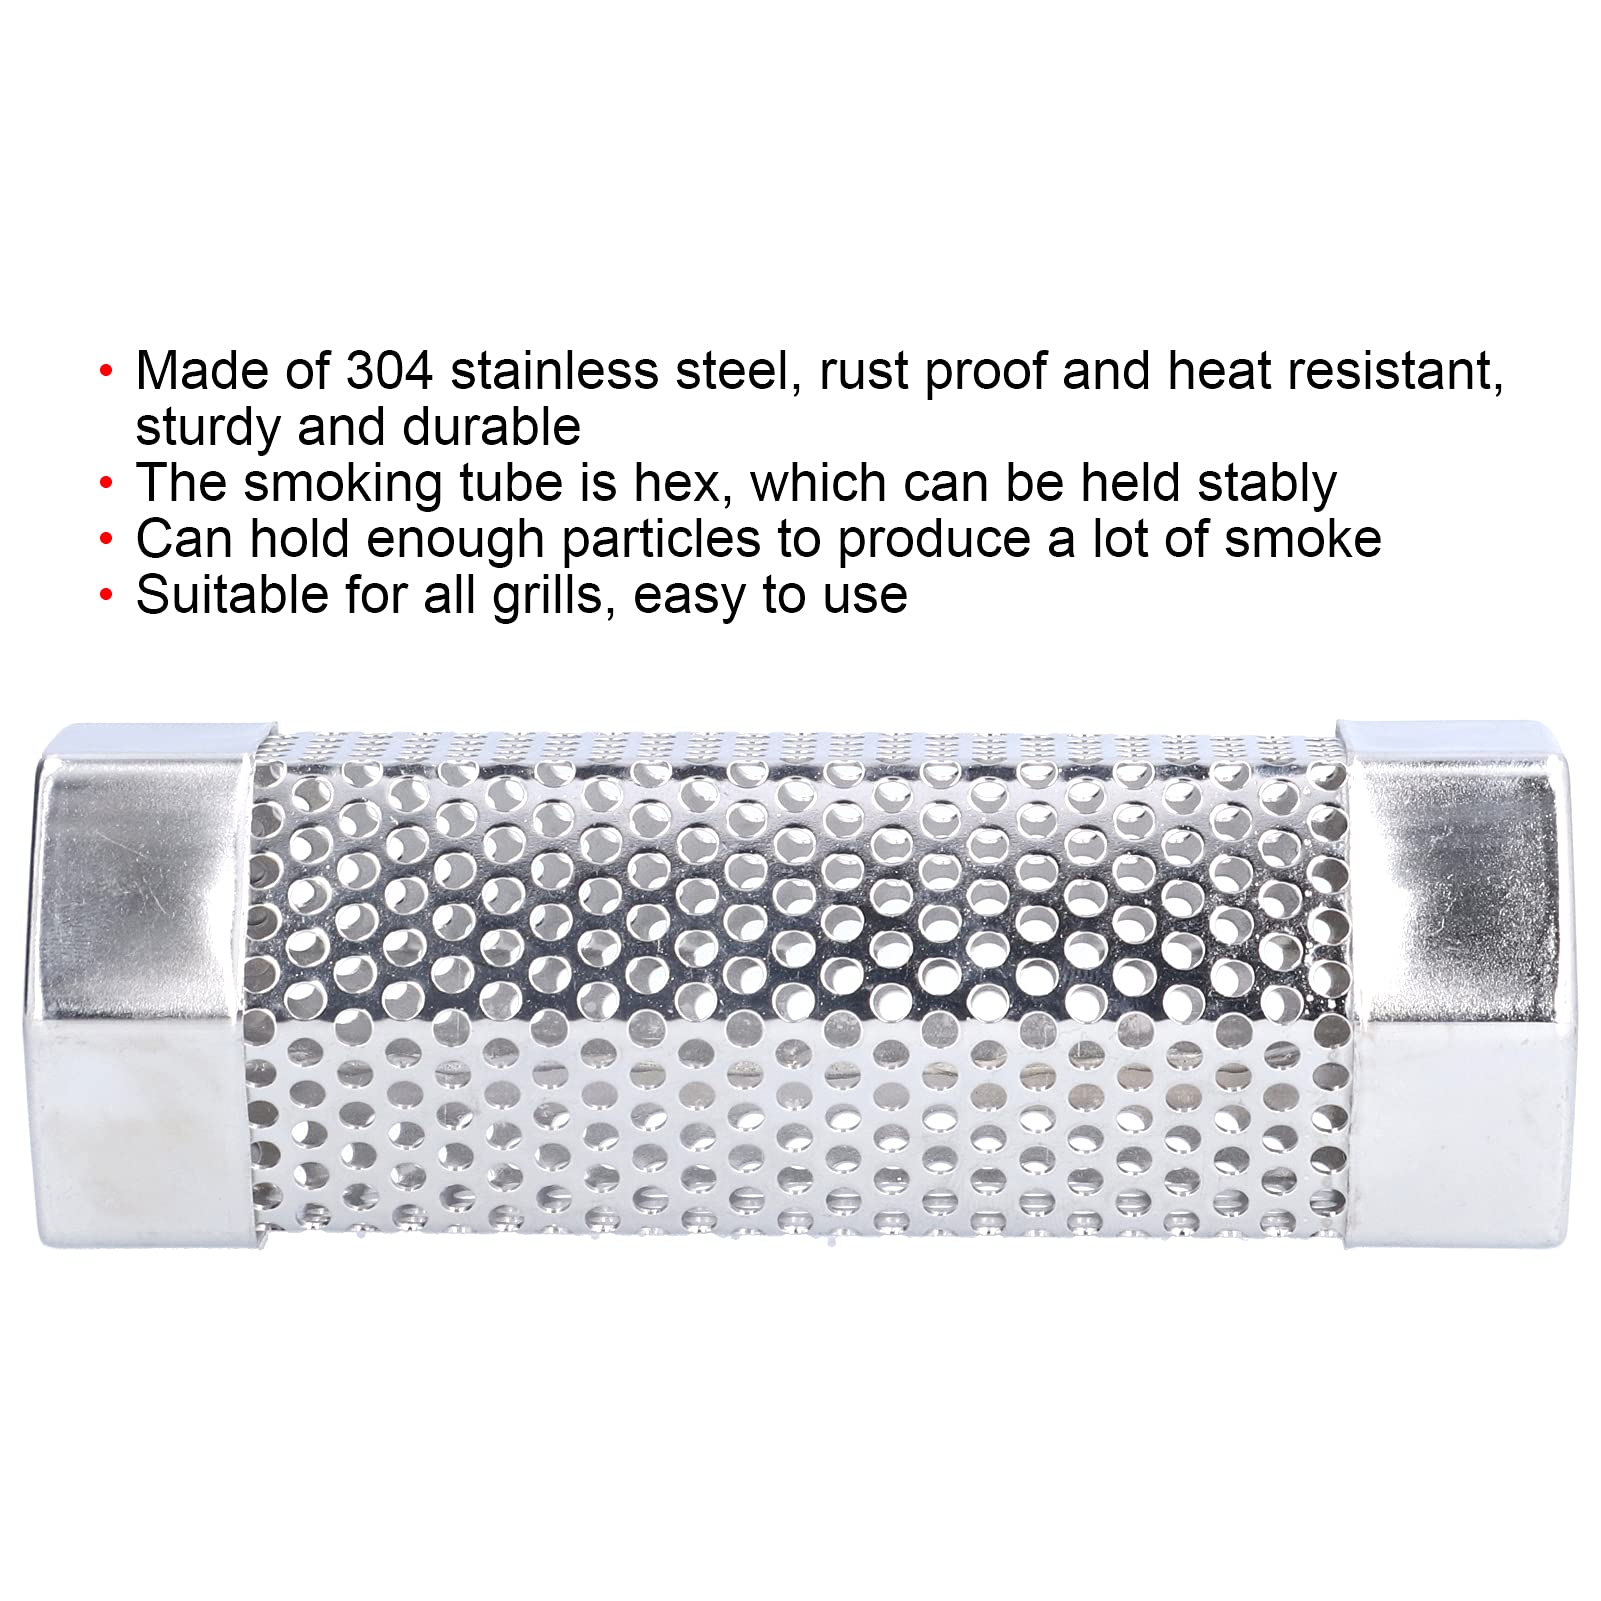 Smoker Tube, 304 Stainless Smoker Tube, Barbecue Smoke Generator Steel Portable Hex Stable Barbecue Smoke Generator Pipe for Cold Hot Smoking Grilled Foods (Length 15.4CM*Height